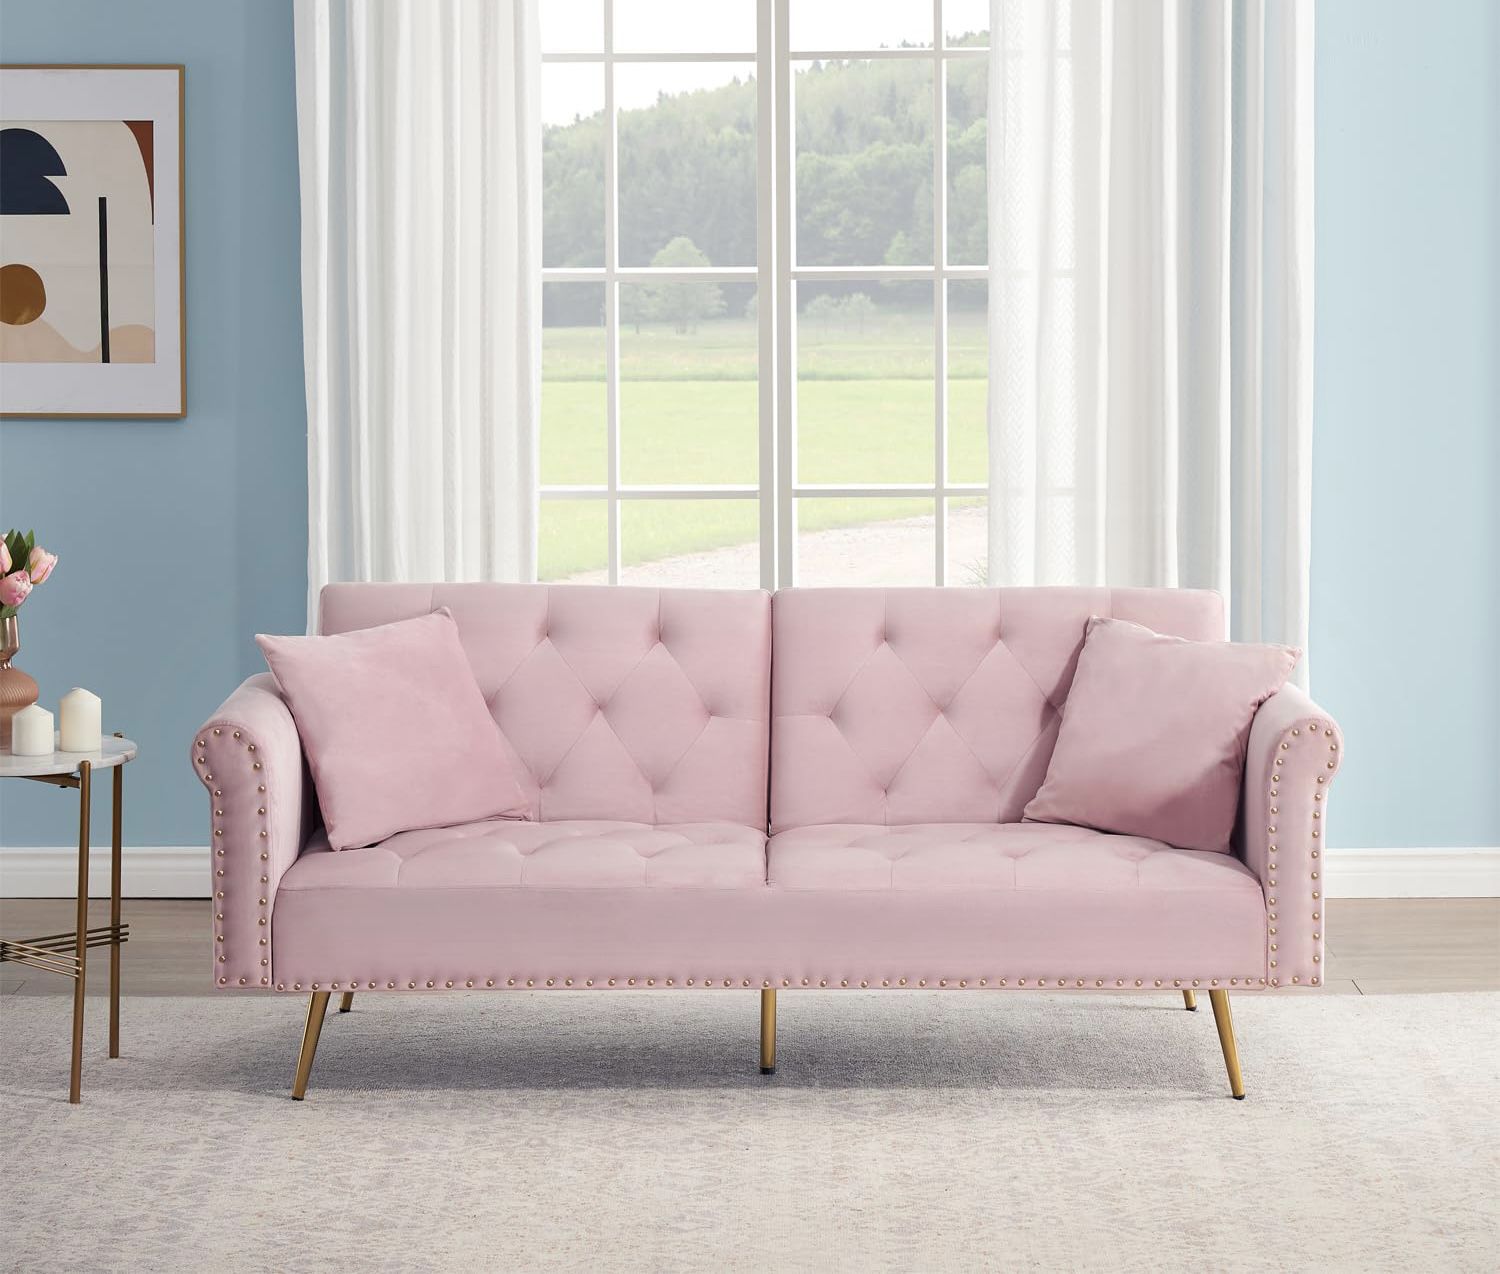 New in box Pink Modern Velvet Fabric Sofa Bed Futon with 2 Pillows